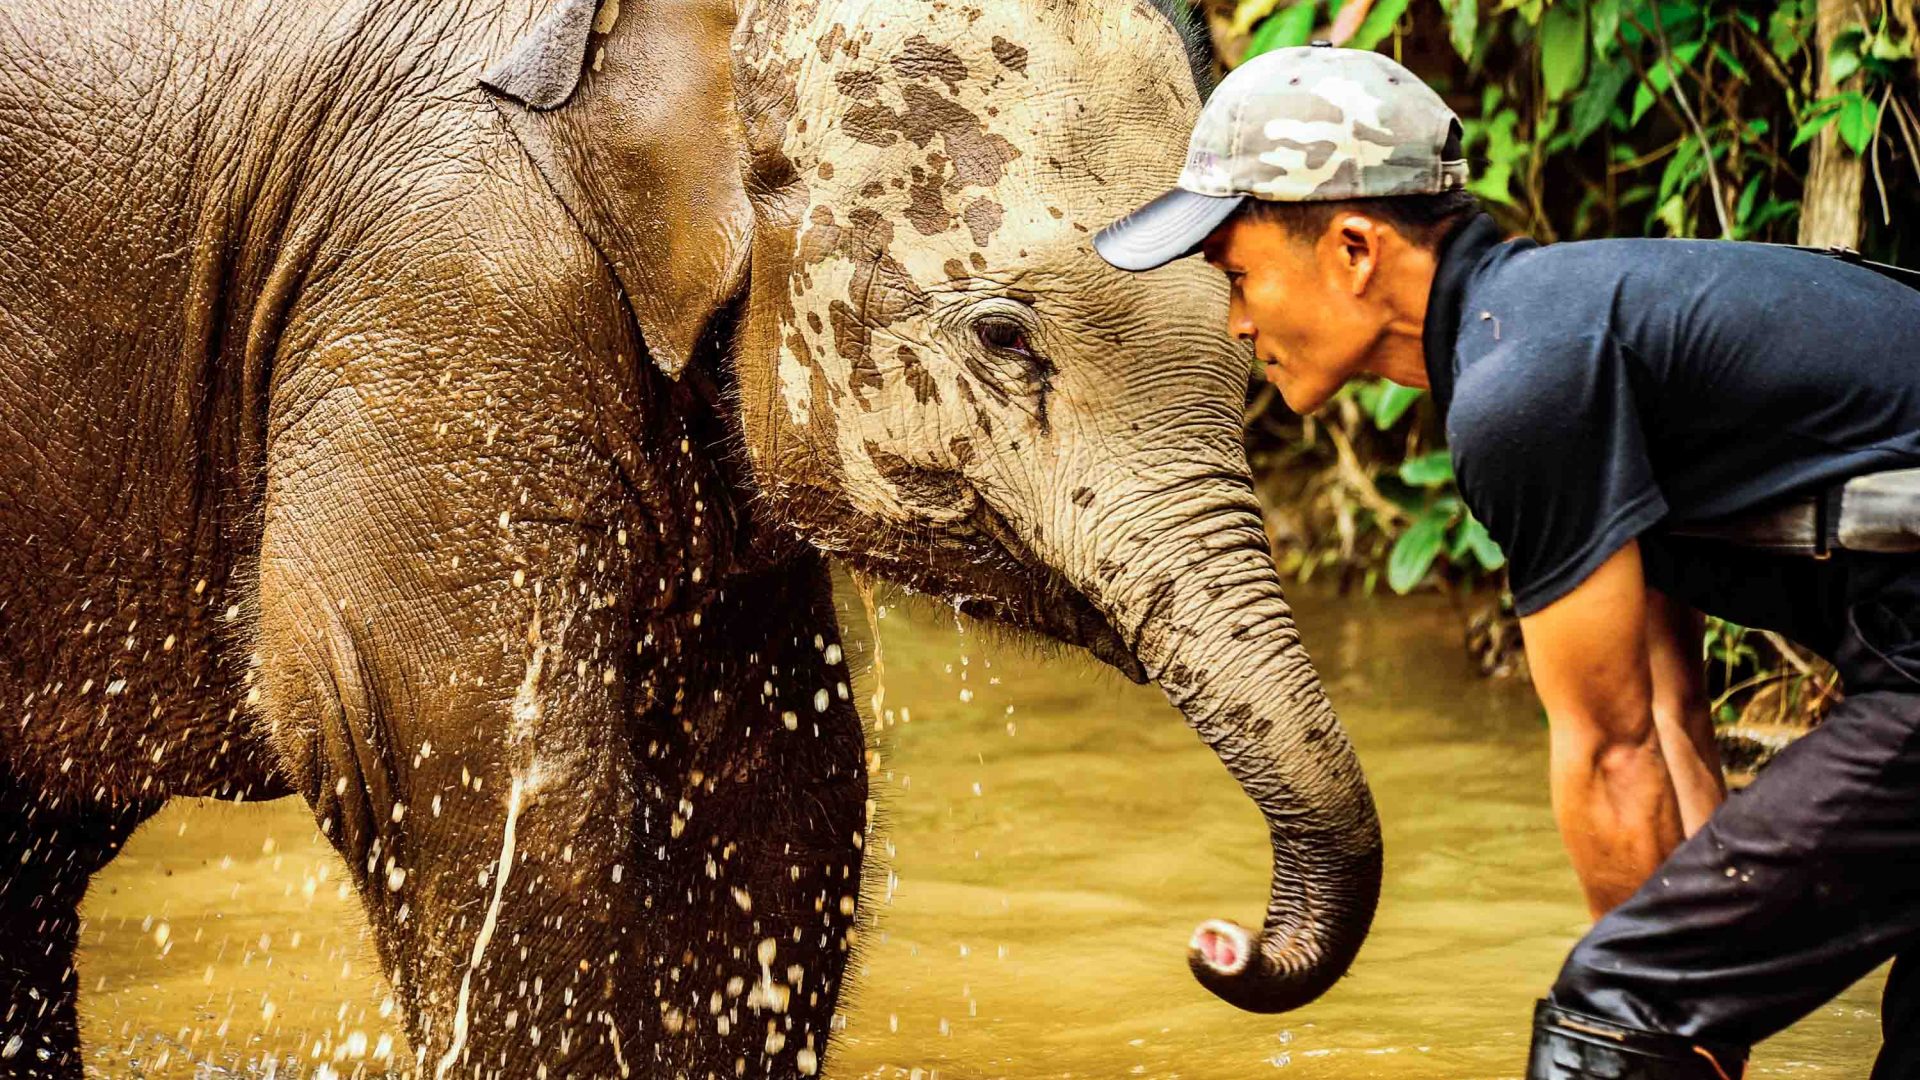 Young Om Koi elephant William with his mahout in the river.